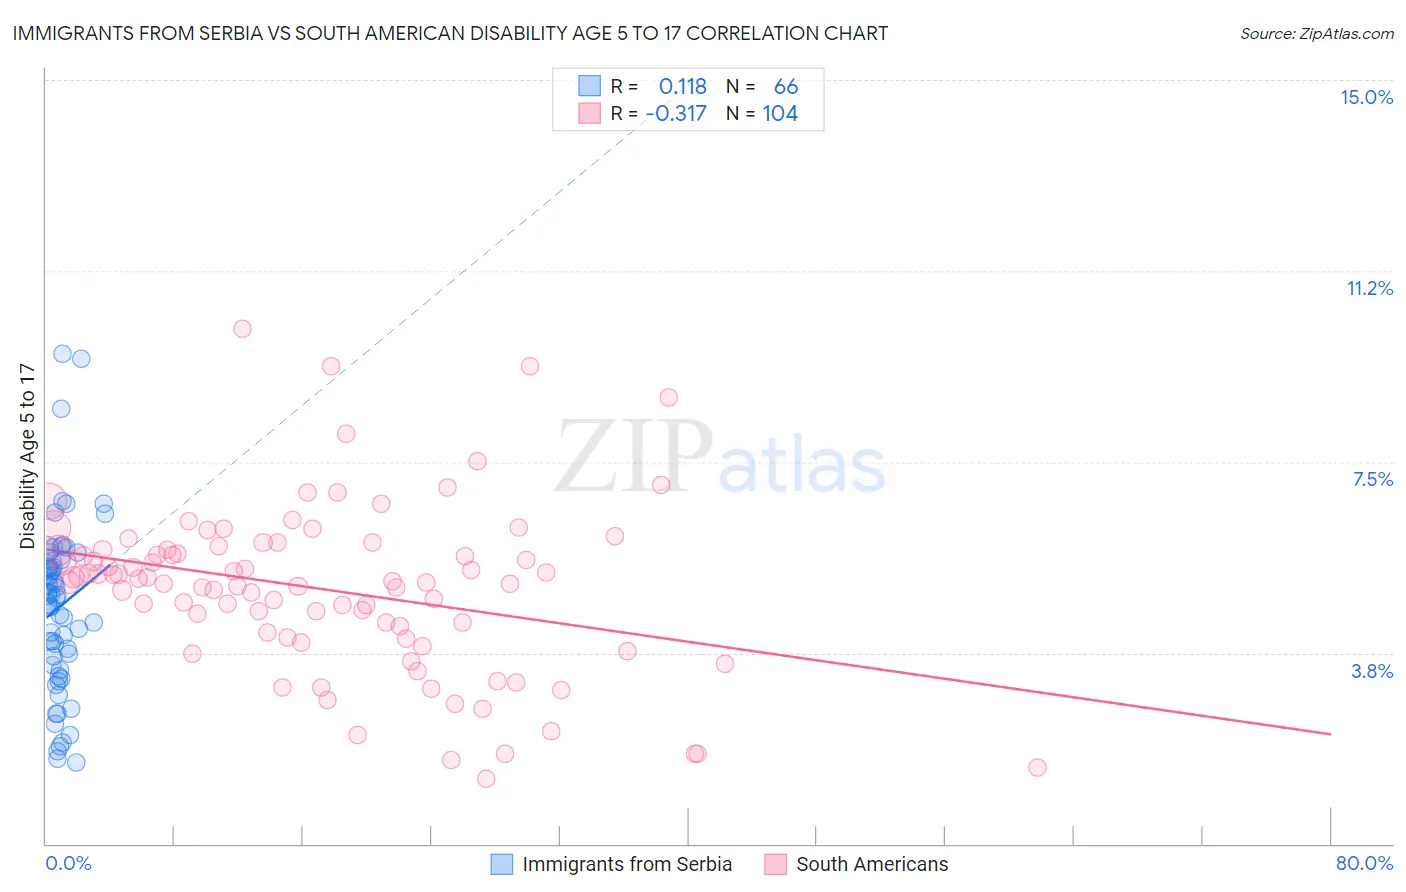 Immigrants from Serbia vs South American Disability Age 5 to 17